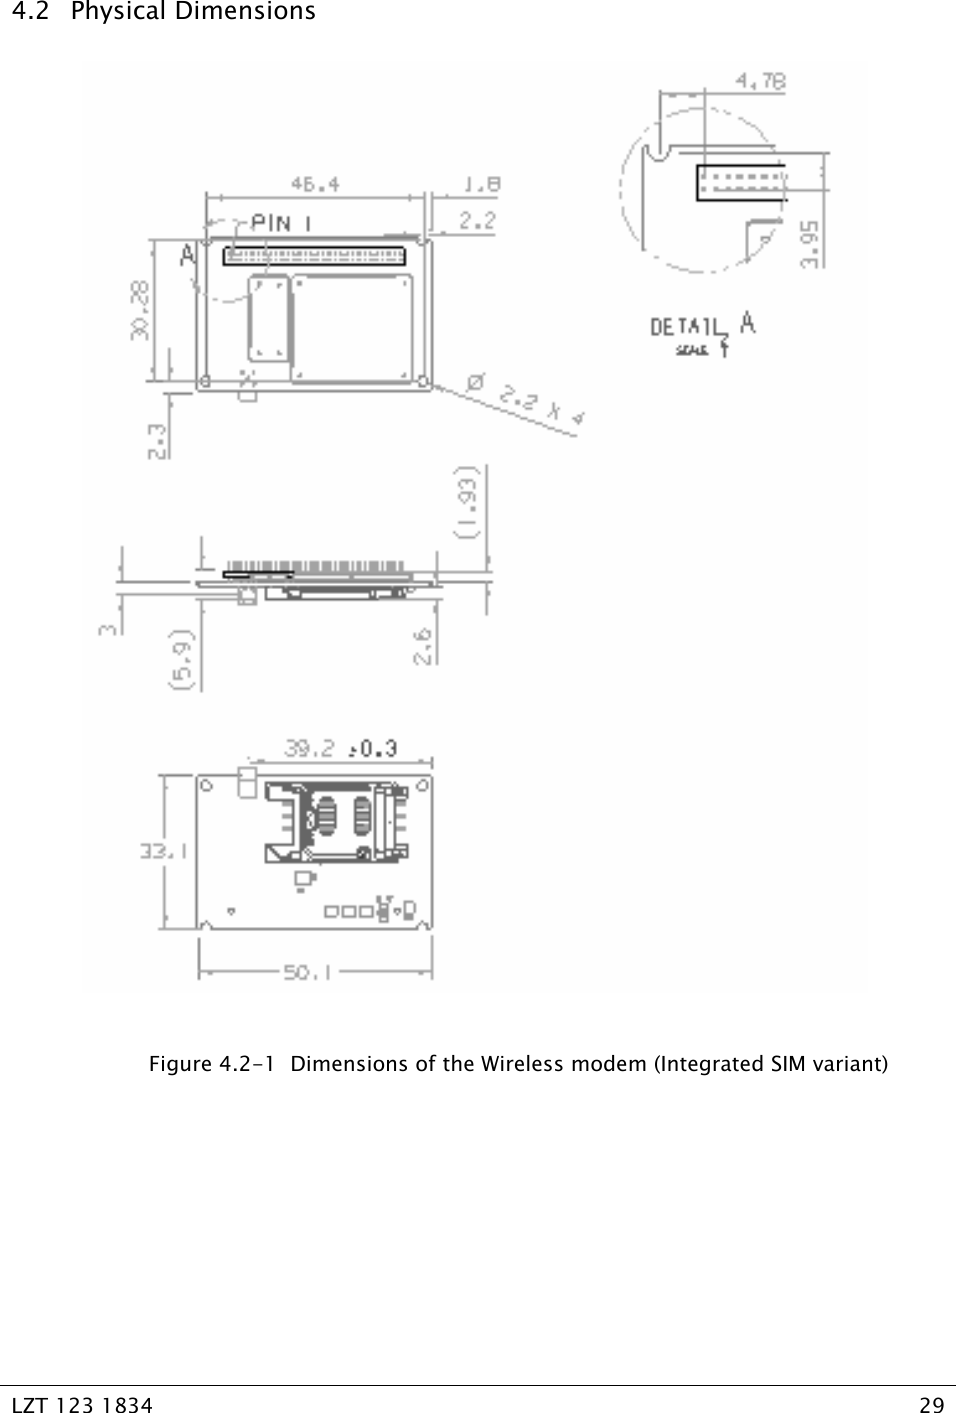   LZT 123 1834  29   4.2 Physical Dimensions   Figure 4.2-1  Dimensions of the Wireless modem (Integrated SIM variant) 